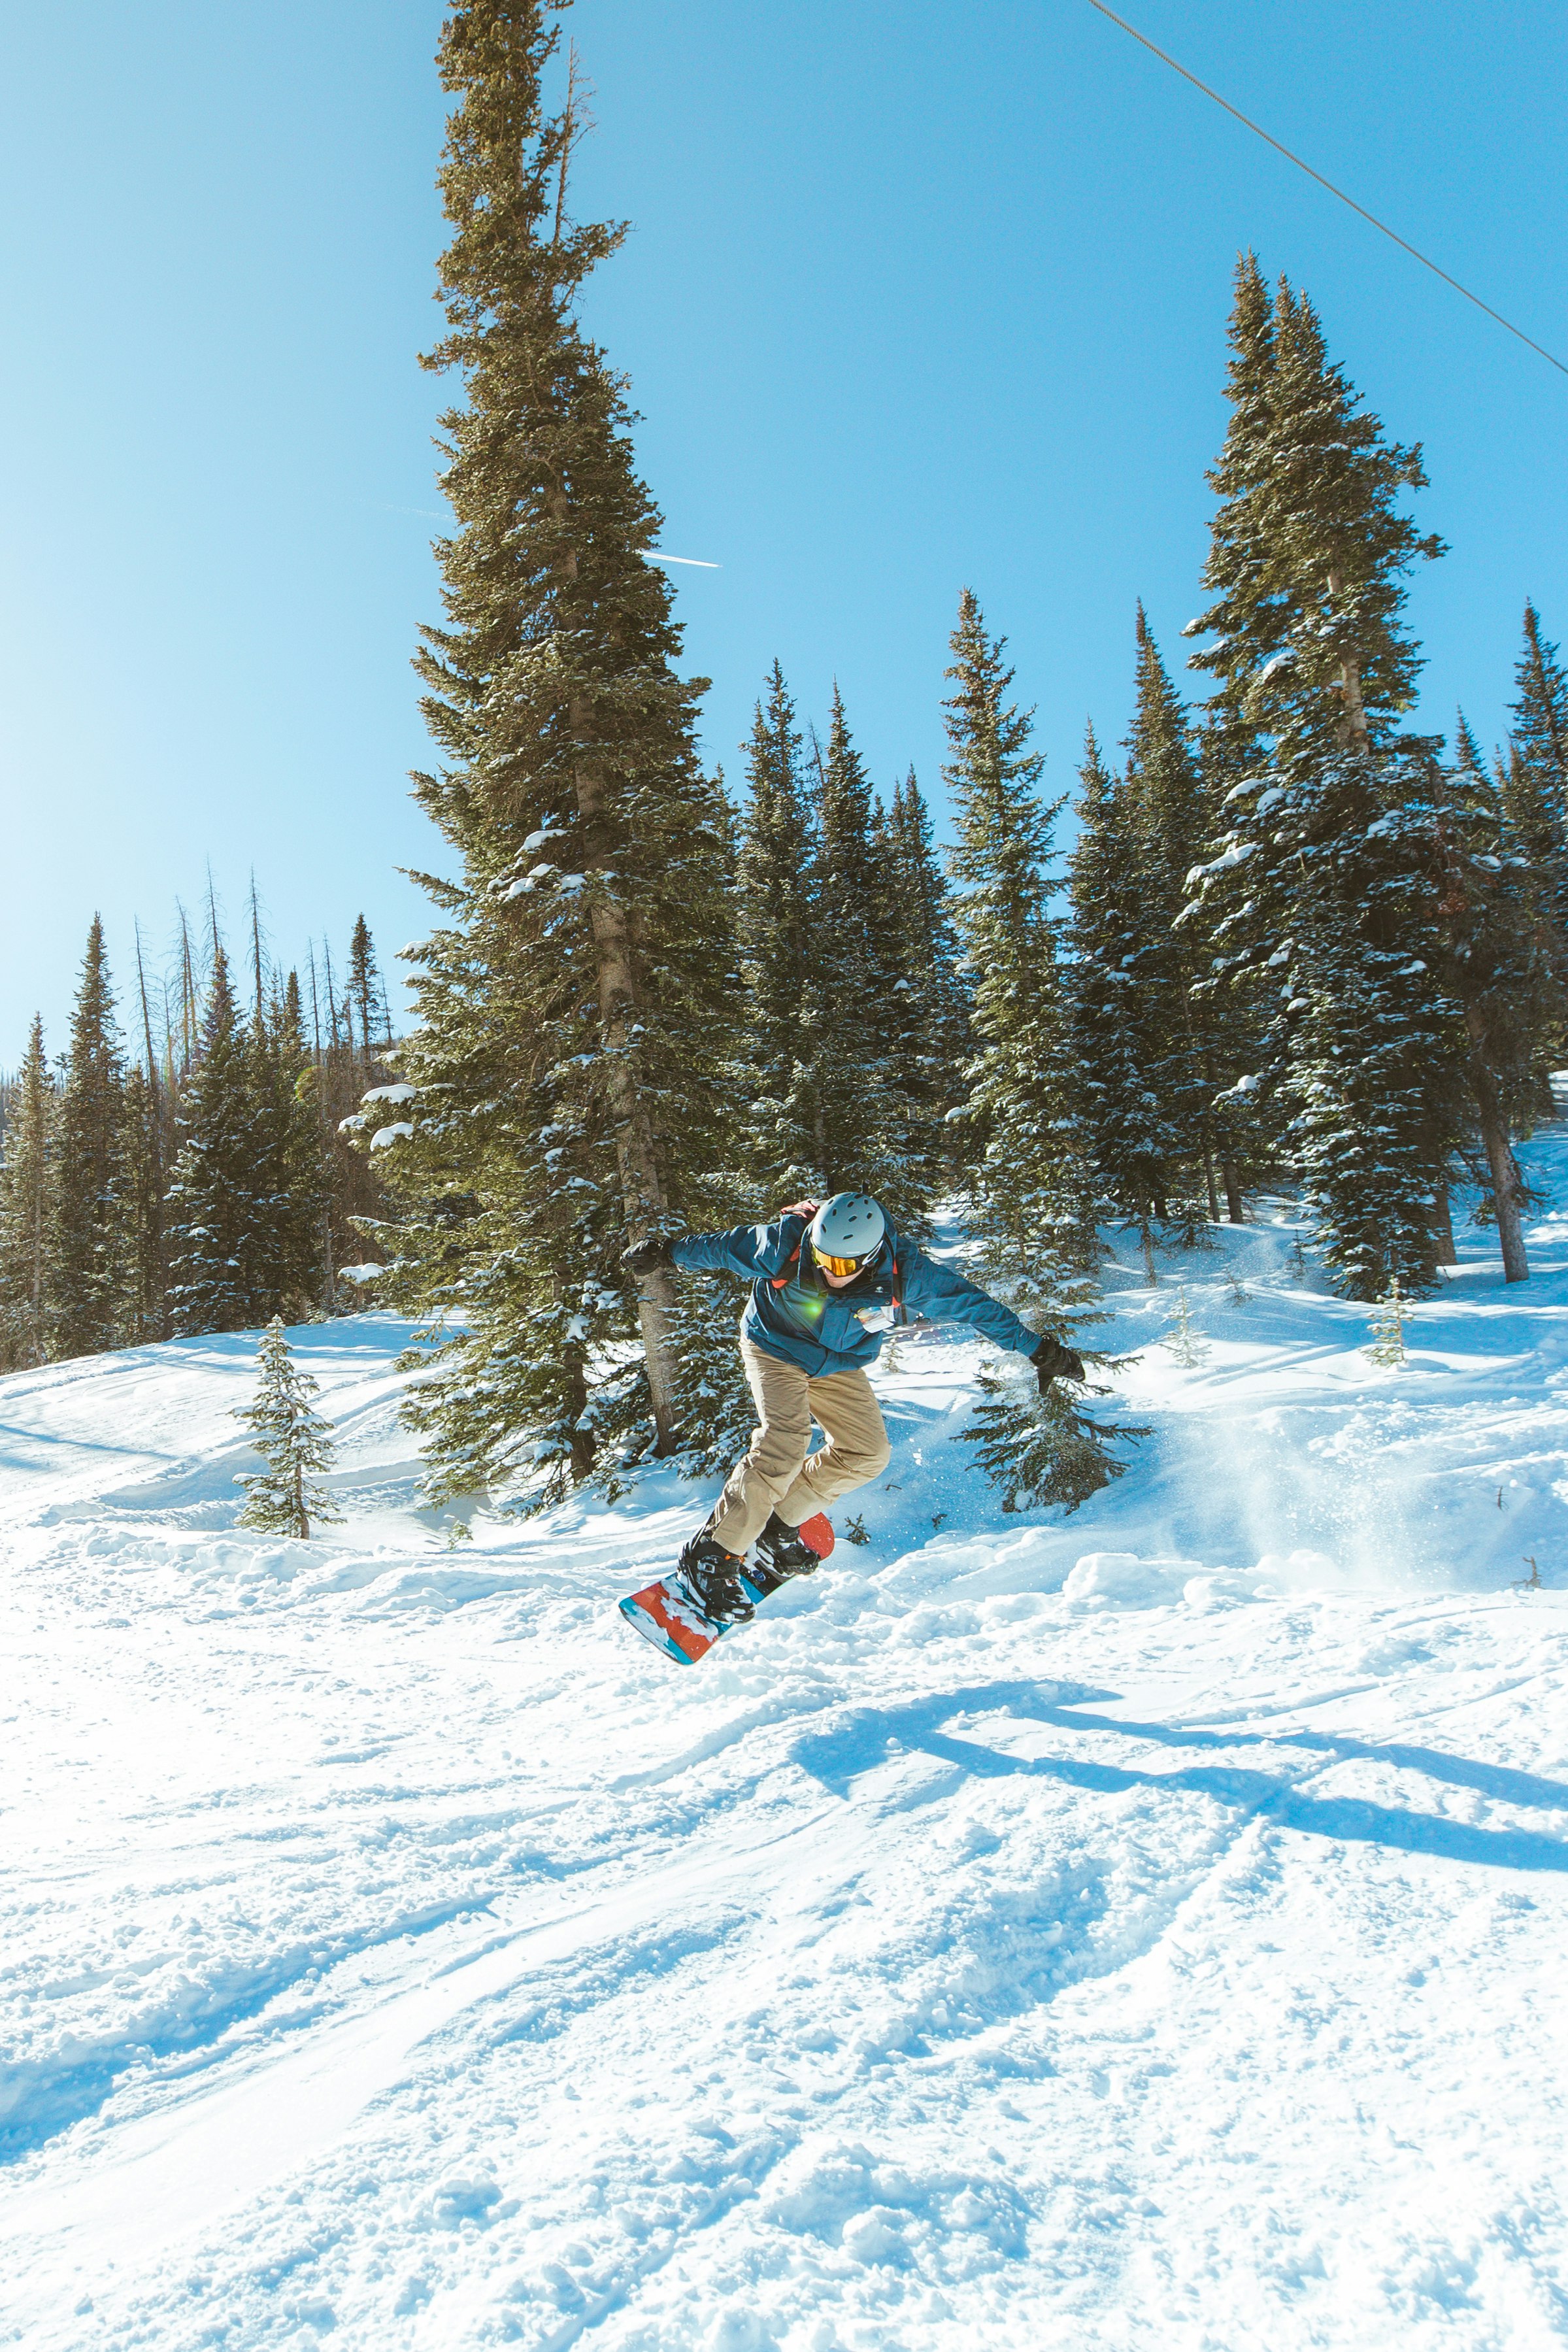 man in blue jacket and red pants riding on snowboard during daytime